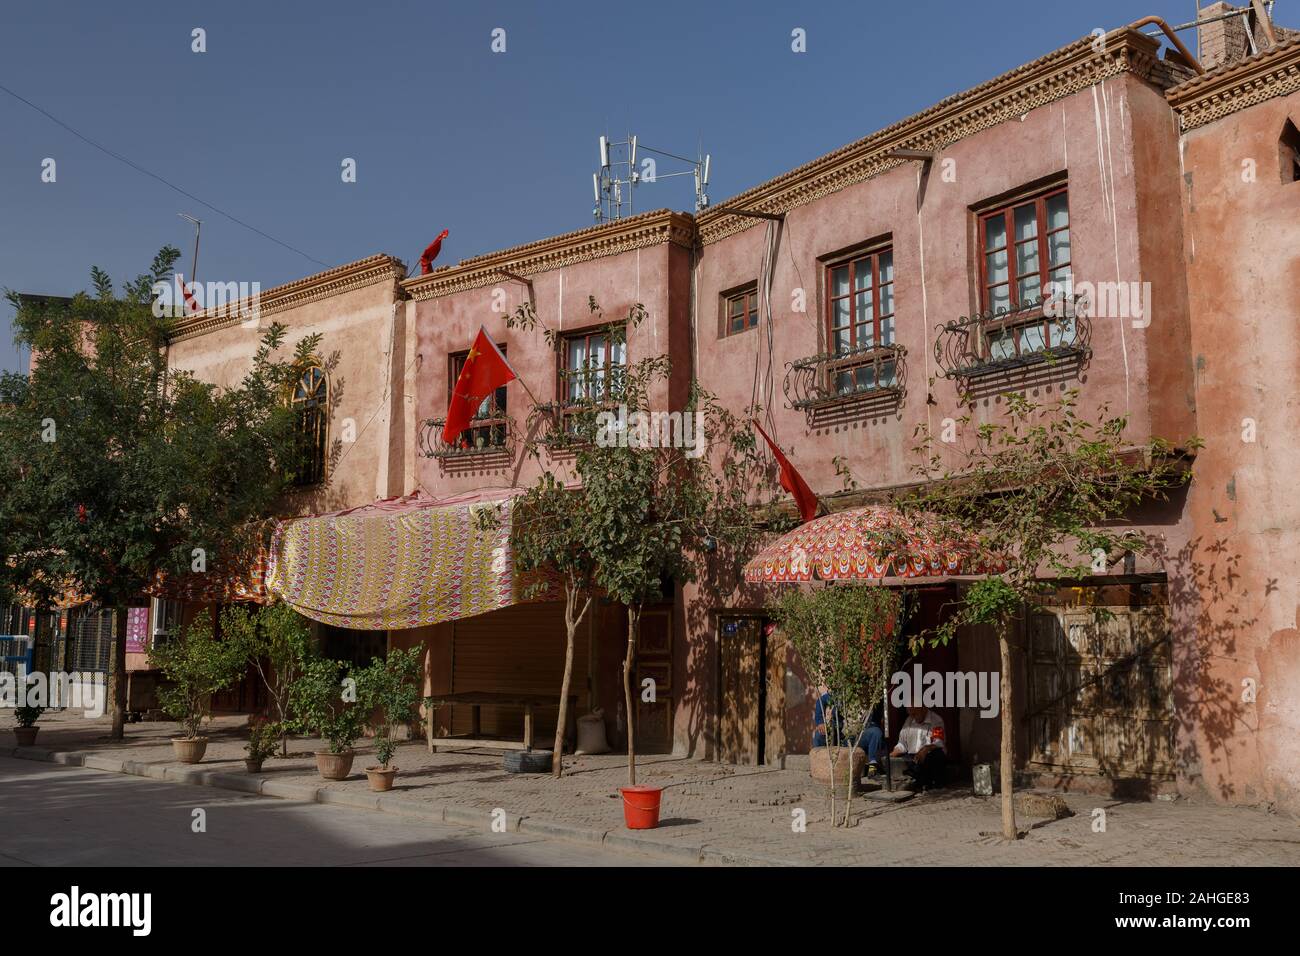 View on traditional Uyghur houses in Kashgar Old Town. Due to Chinese National Holiday Chinese flags are mounted on the houses. Stock Photo